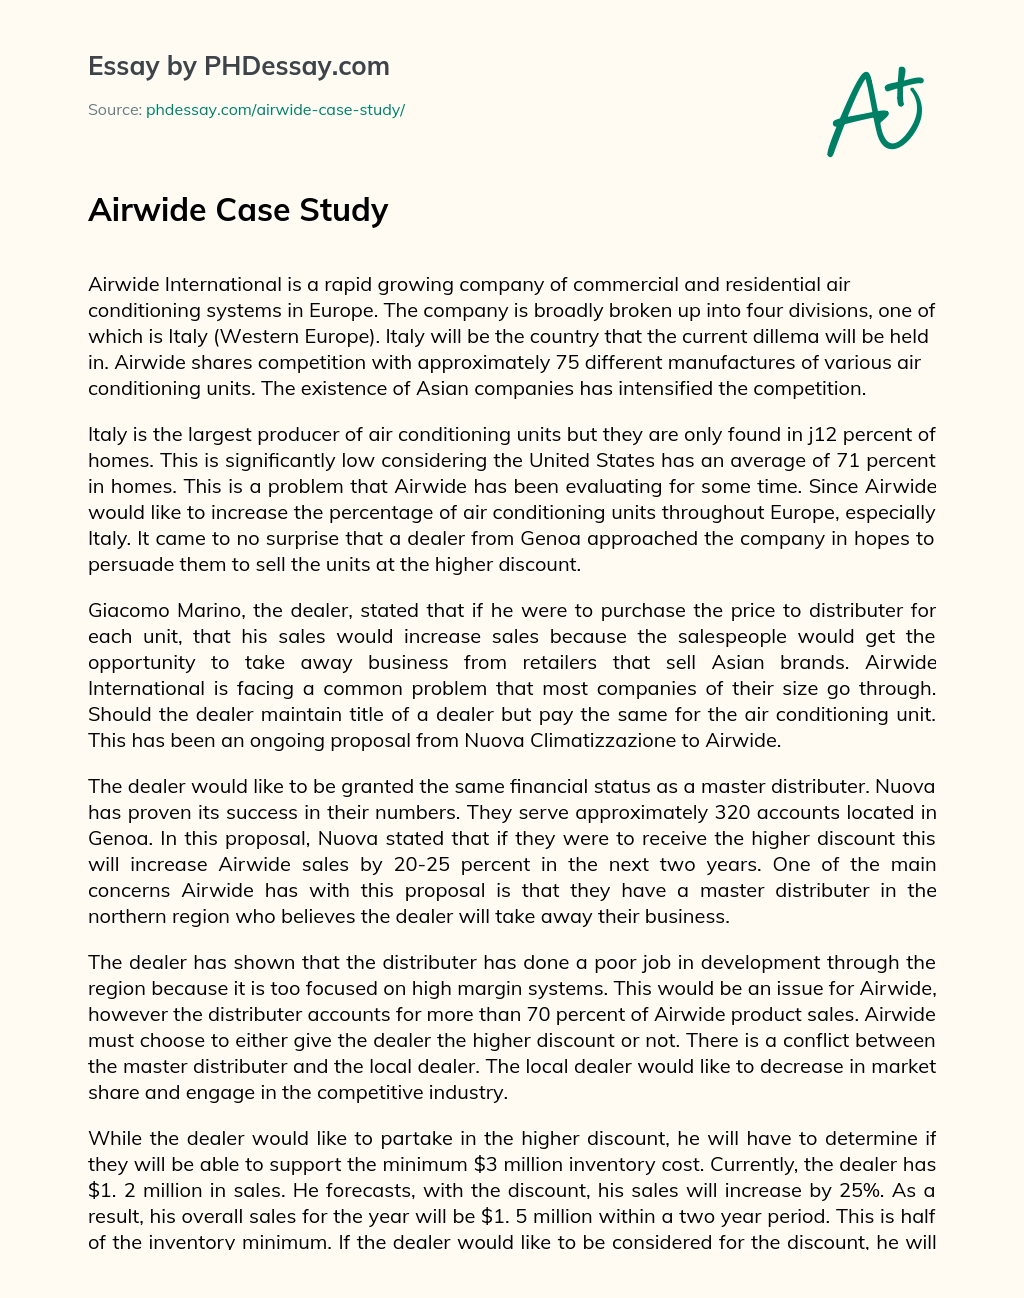 Airwide Case Study essay